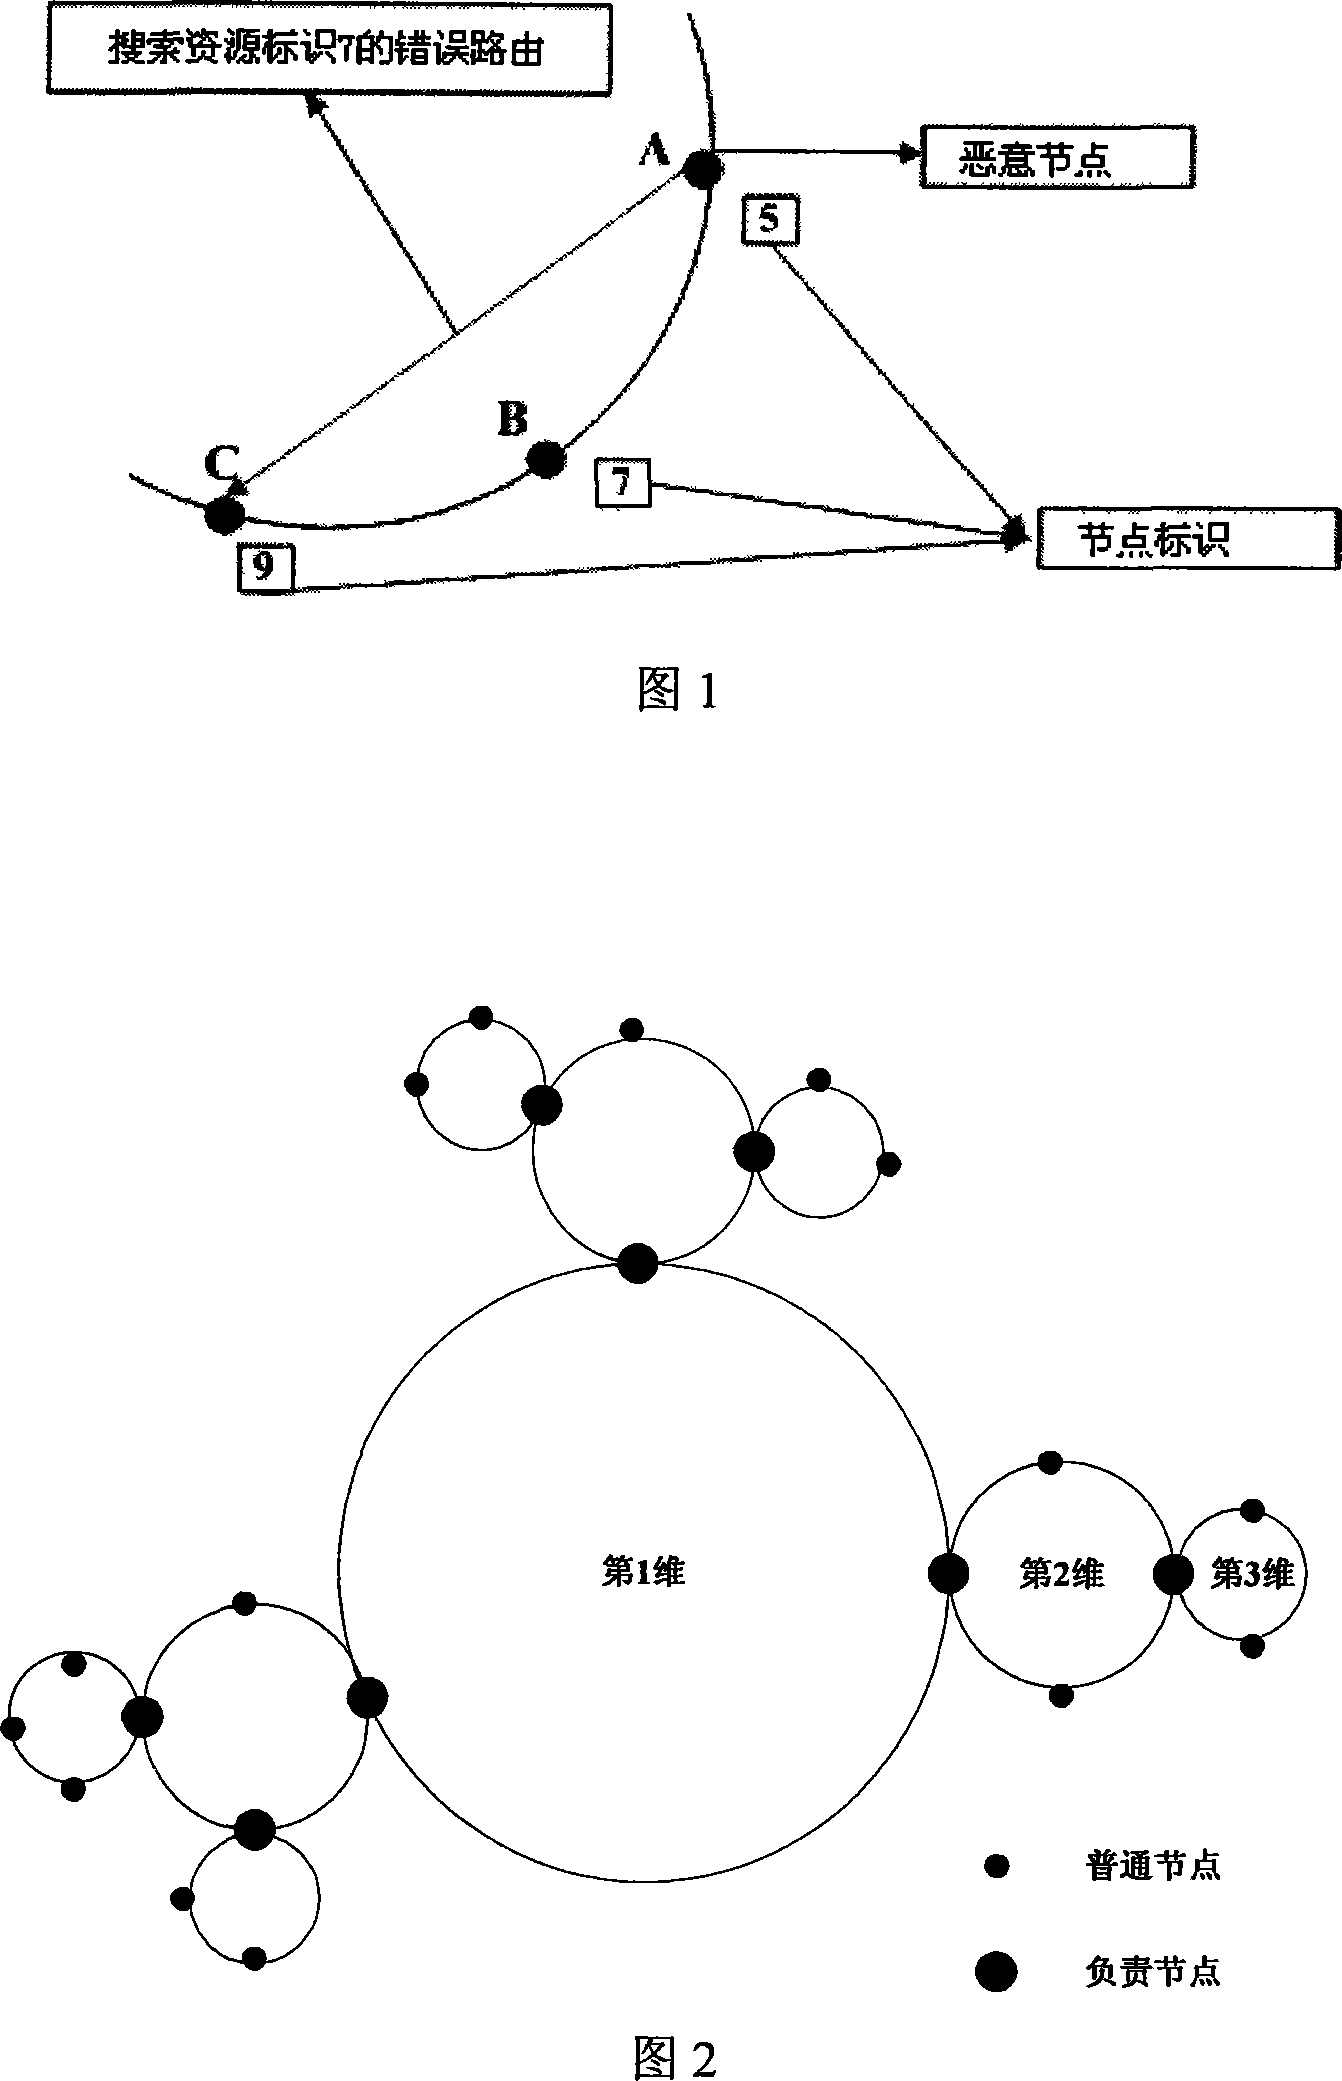 Peer network secure routing method based on multi-dimension distributed hash table